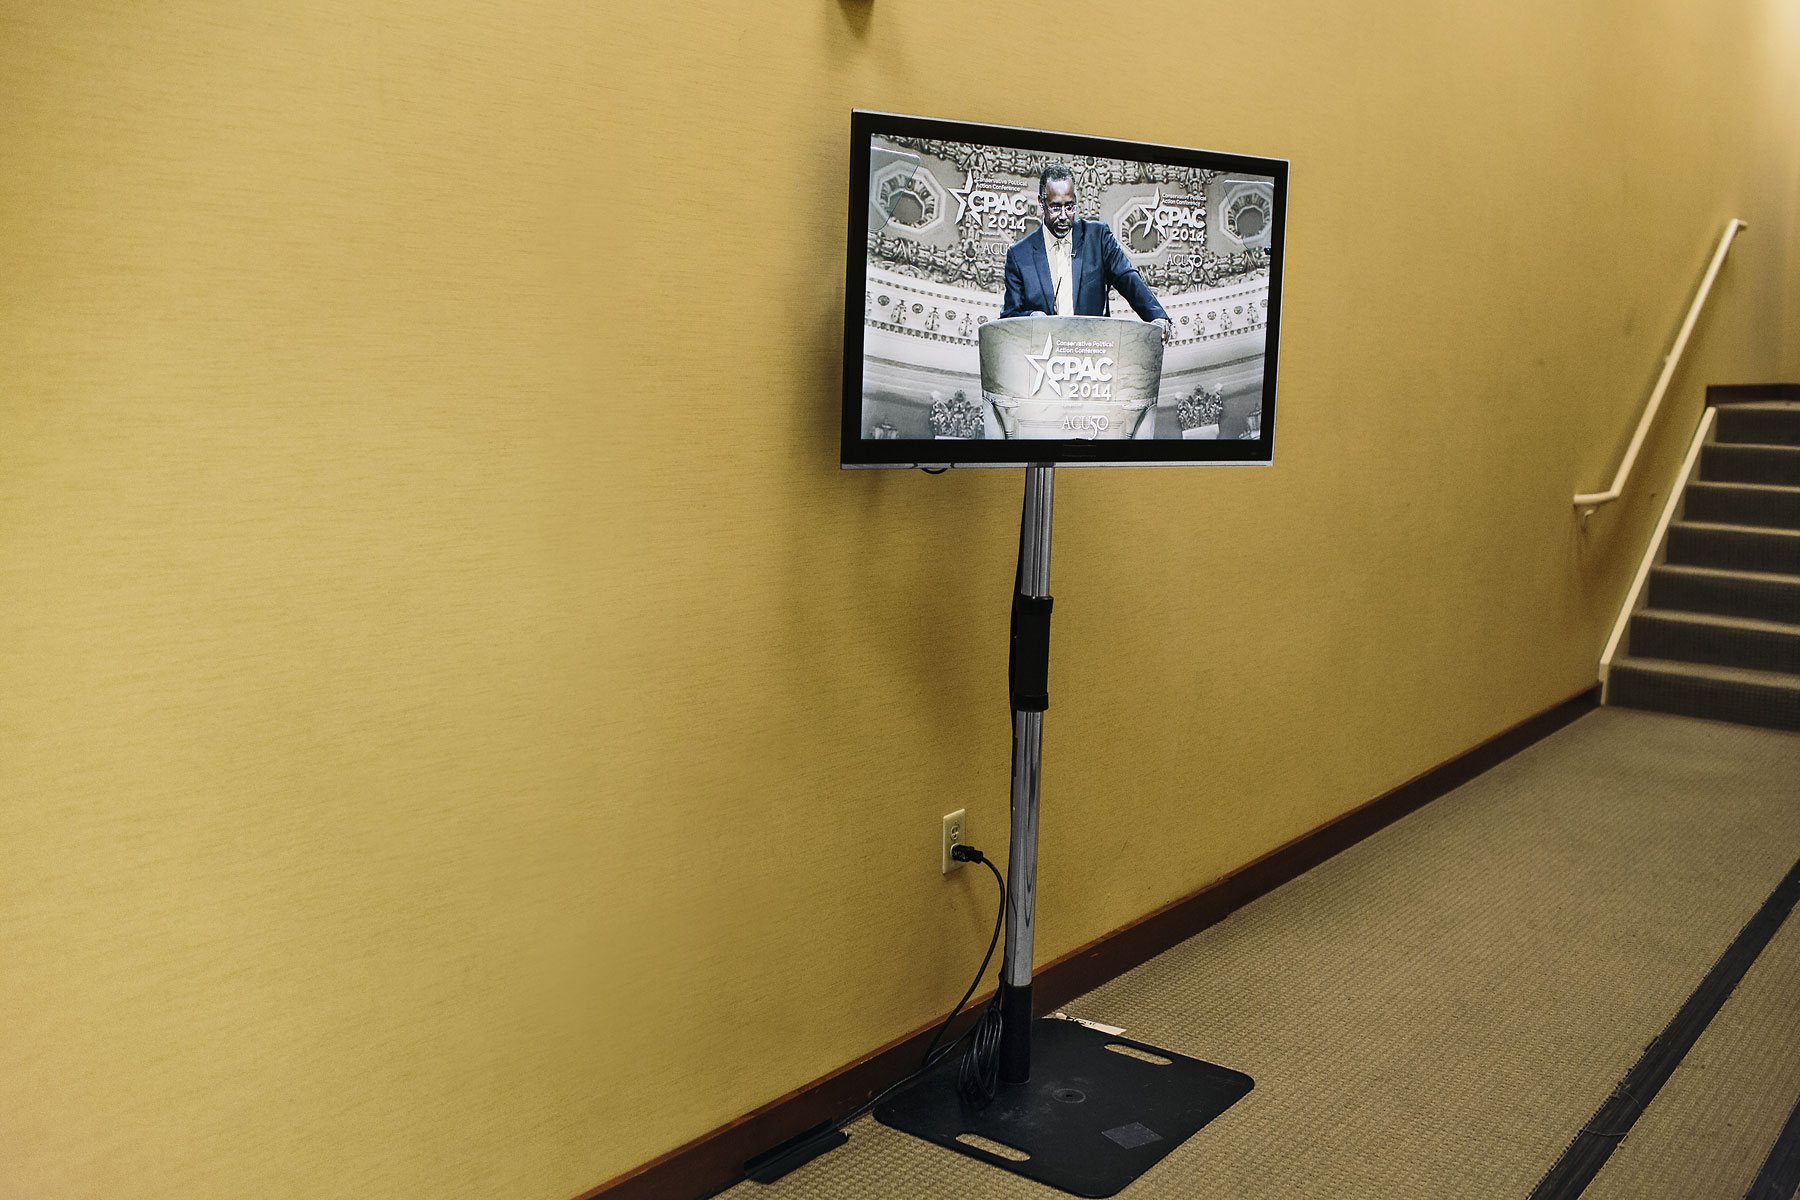 Dr. Ben Carson is shown on a screen backstage while he speaks during the final day of the Conservative Political Action Conference (CPAC) at the Gaylord National Resort & Convention Center in National Harbor, Md.